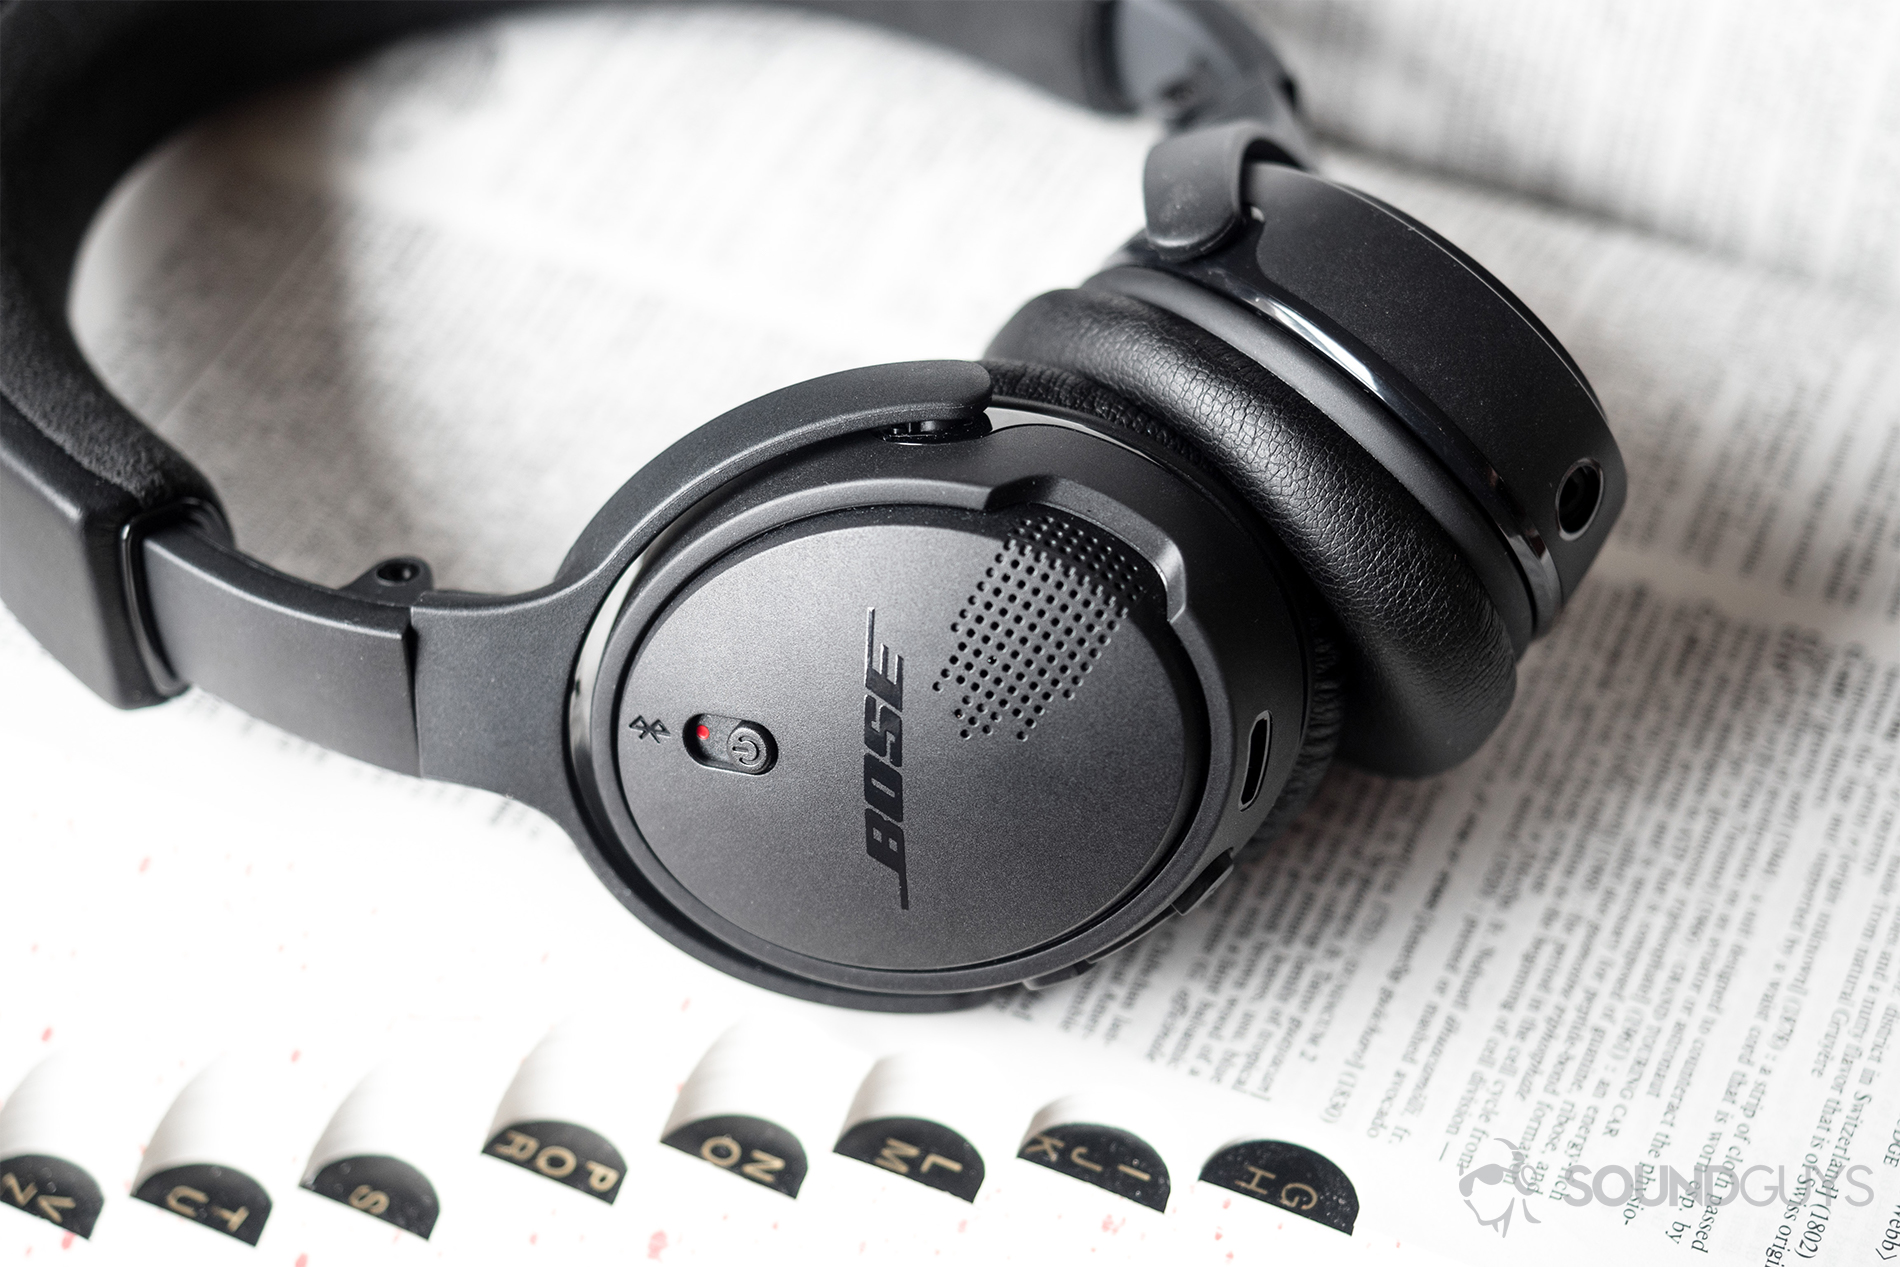 Made from a black plastic, the Bose On-Ear Wireless look classy and timeless, but their attenuated build may be cause for premature breakage. Pictured: The Bose On-Ear Wireless headphones with the right ear cup in focus, showing off the power switch and dual microphones. The headphones are laid flatly on an open dictionary.